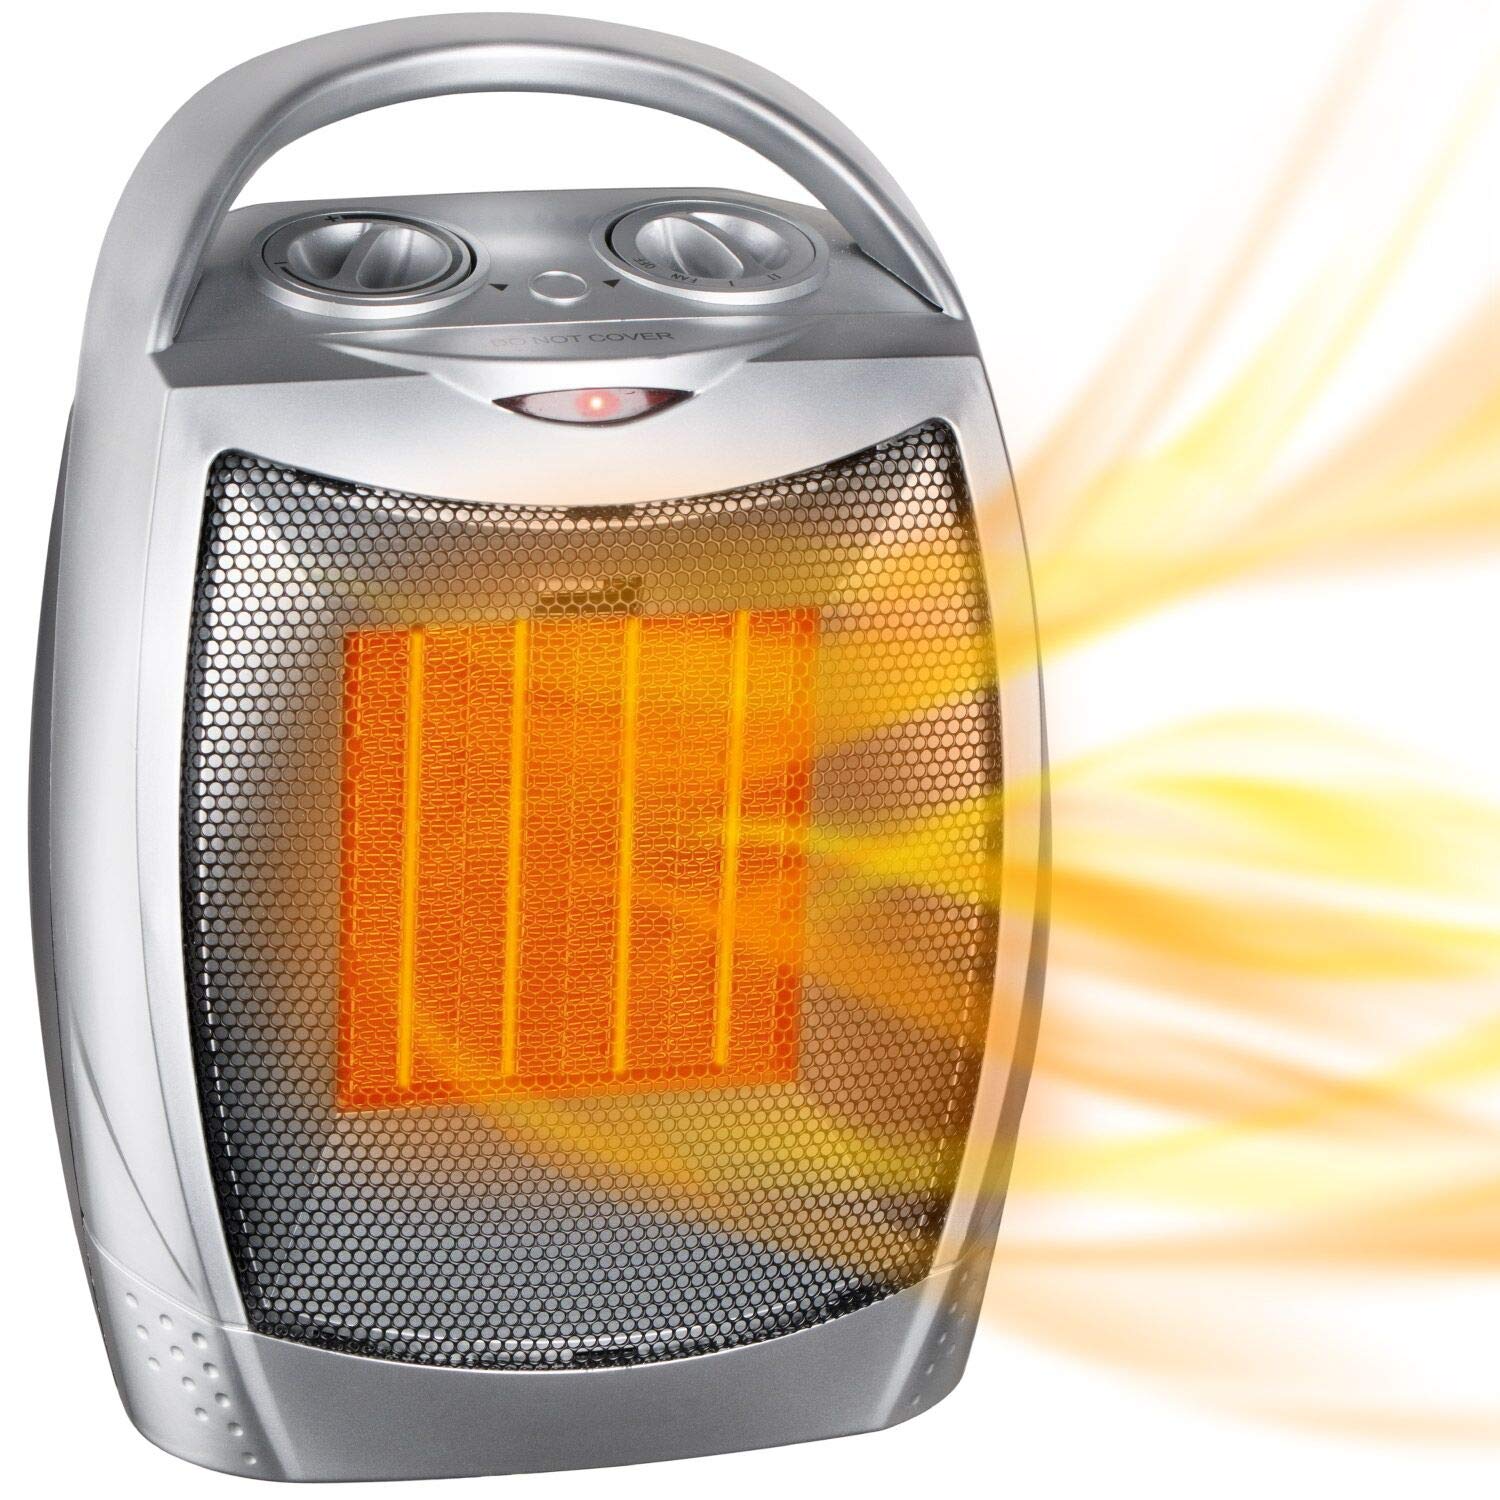 Amazon Lightning Deal: GiveBest 1500W/750W Portable Electric Ceramic Space Heater w/ Thermostat $9 + Free Shipping w/ Prime or $35+